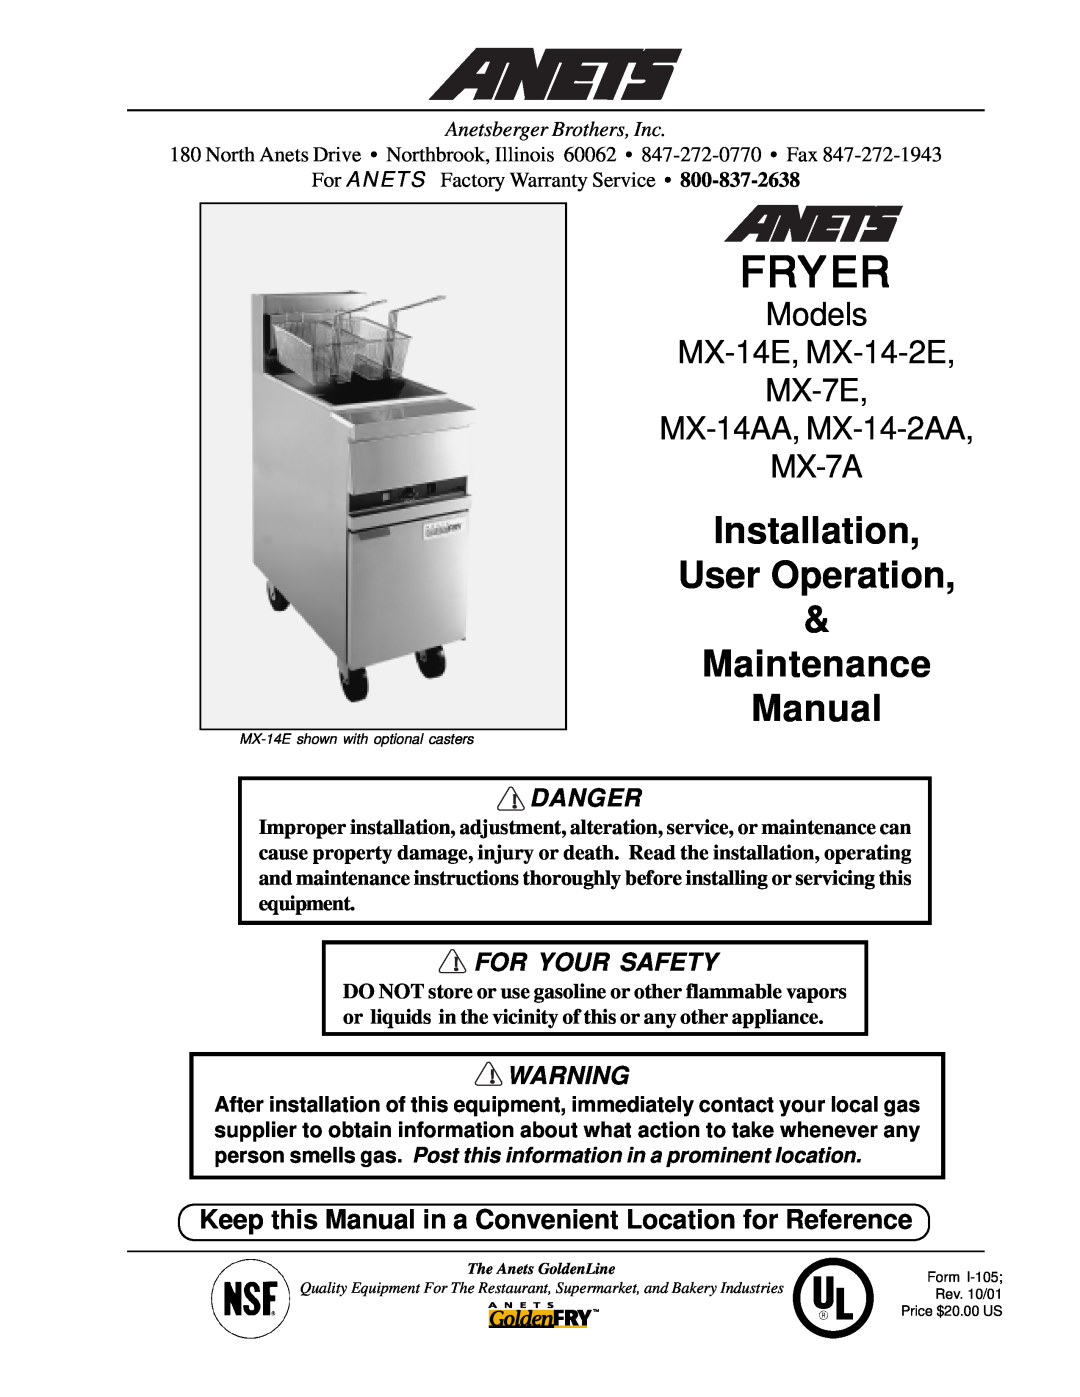 Anetsberger Brothers MX-14E warranty Danger, For Your Safety, Fryer, Installation User Operation & Maintenance Manual 